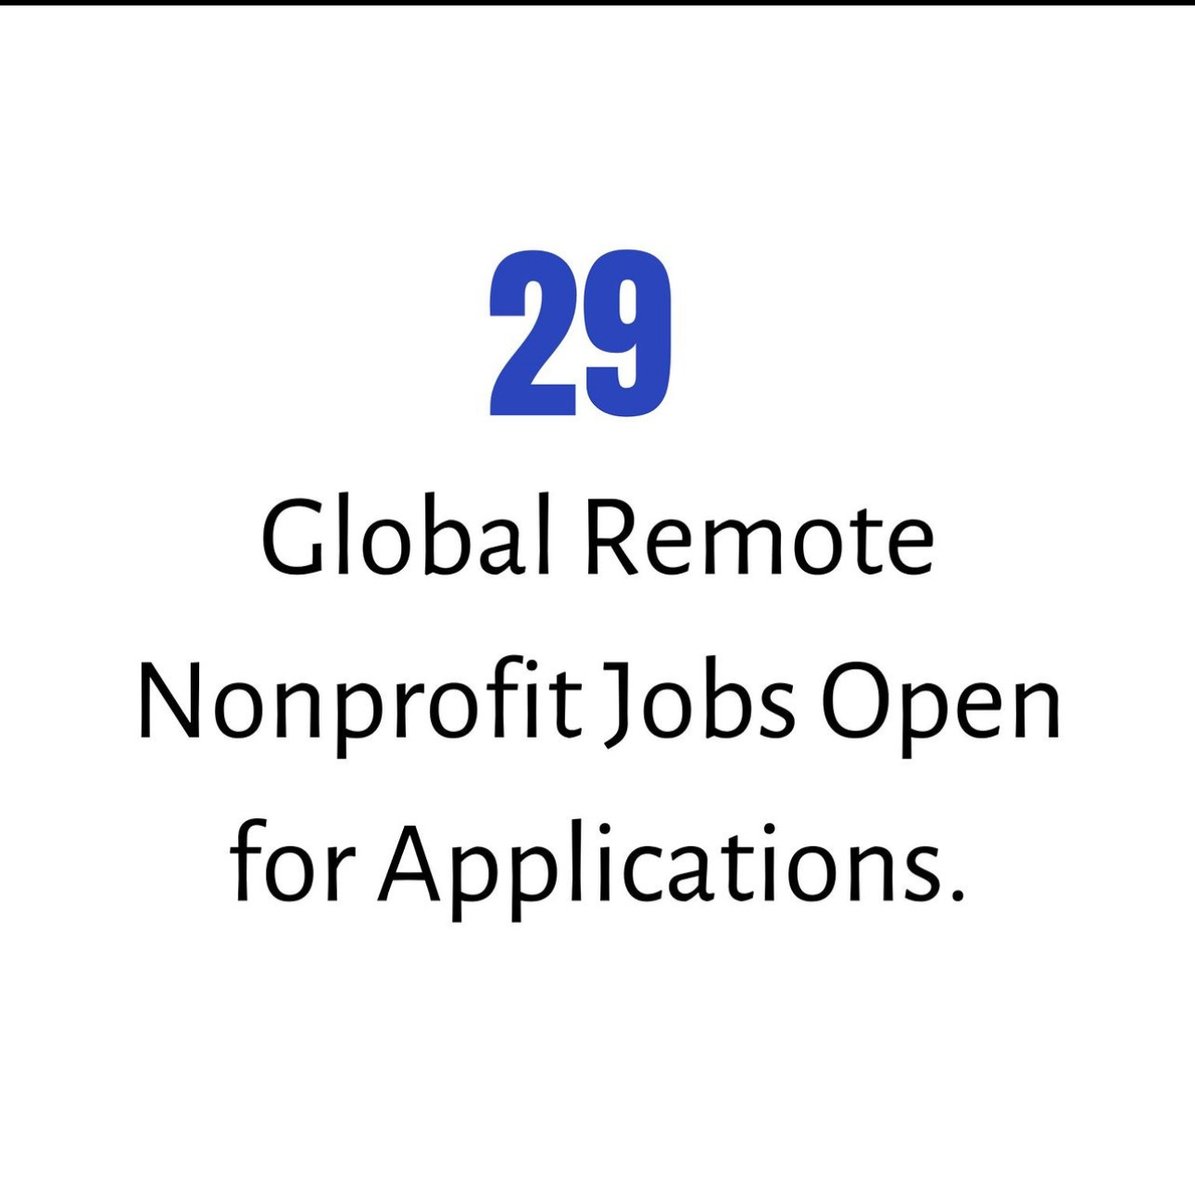 Passionate about making a difference? 29 Global Remote Nonprofit Job Opportunities and more(Open to several nationalities)

Deadline: Varies

Link shorturl.at/mwHI7

#NonprofitJobs #RemoteWork #GlobalOpportunities #MakeADifference #hiring #jobsalert